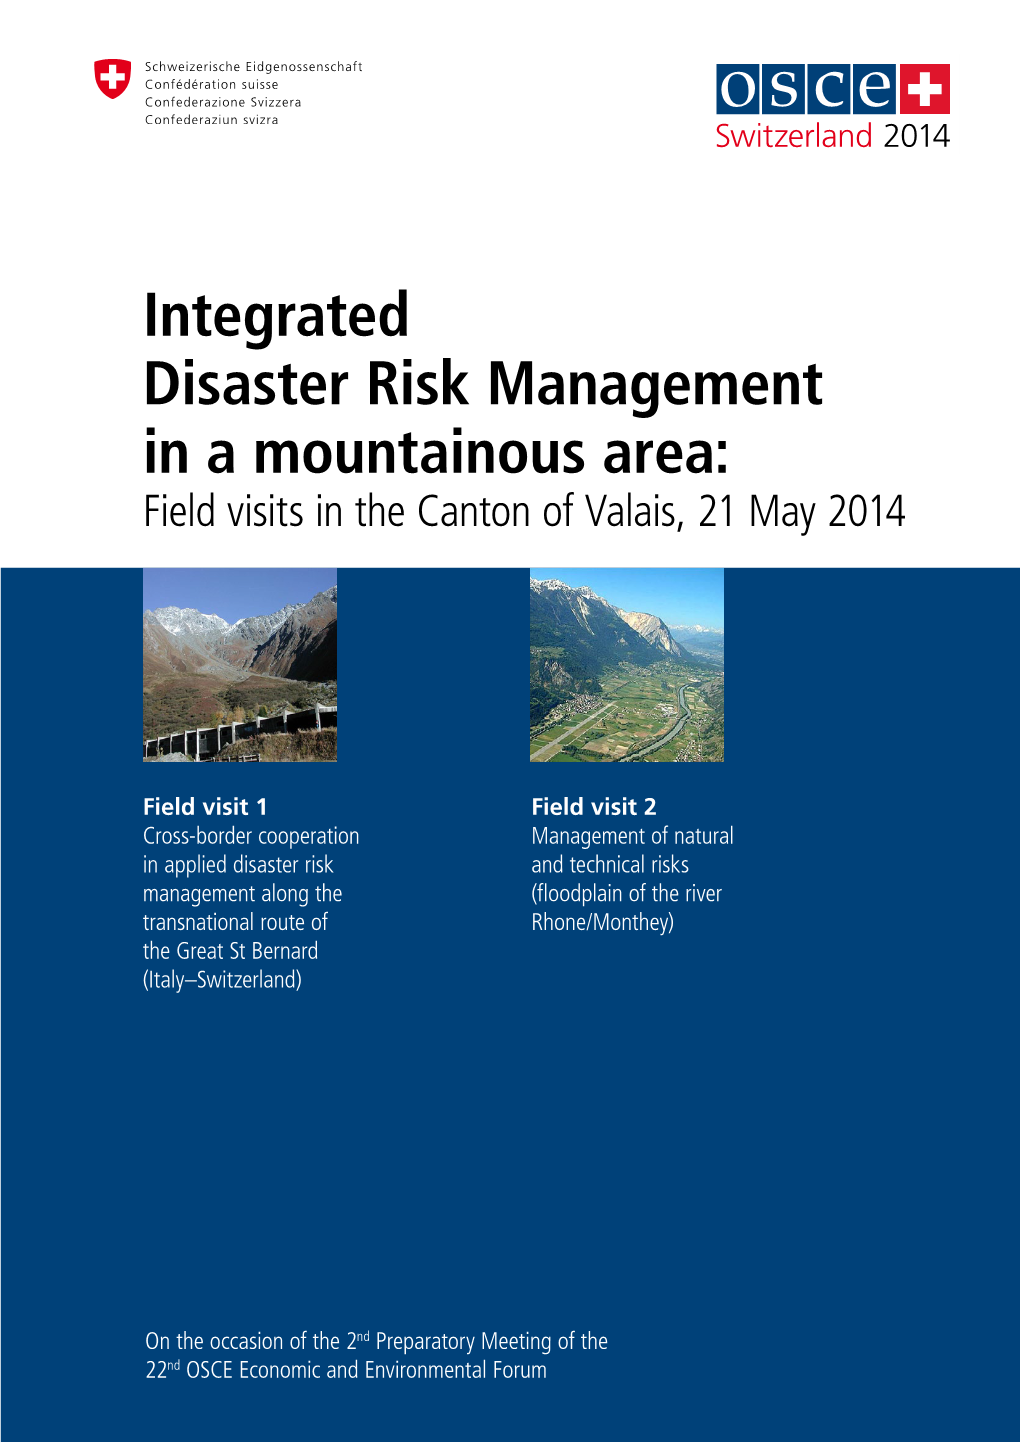 Integrated Disaster Risk Management in a Mountainous Area: Field Visits in the Canton of Valais, 21 May 2014